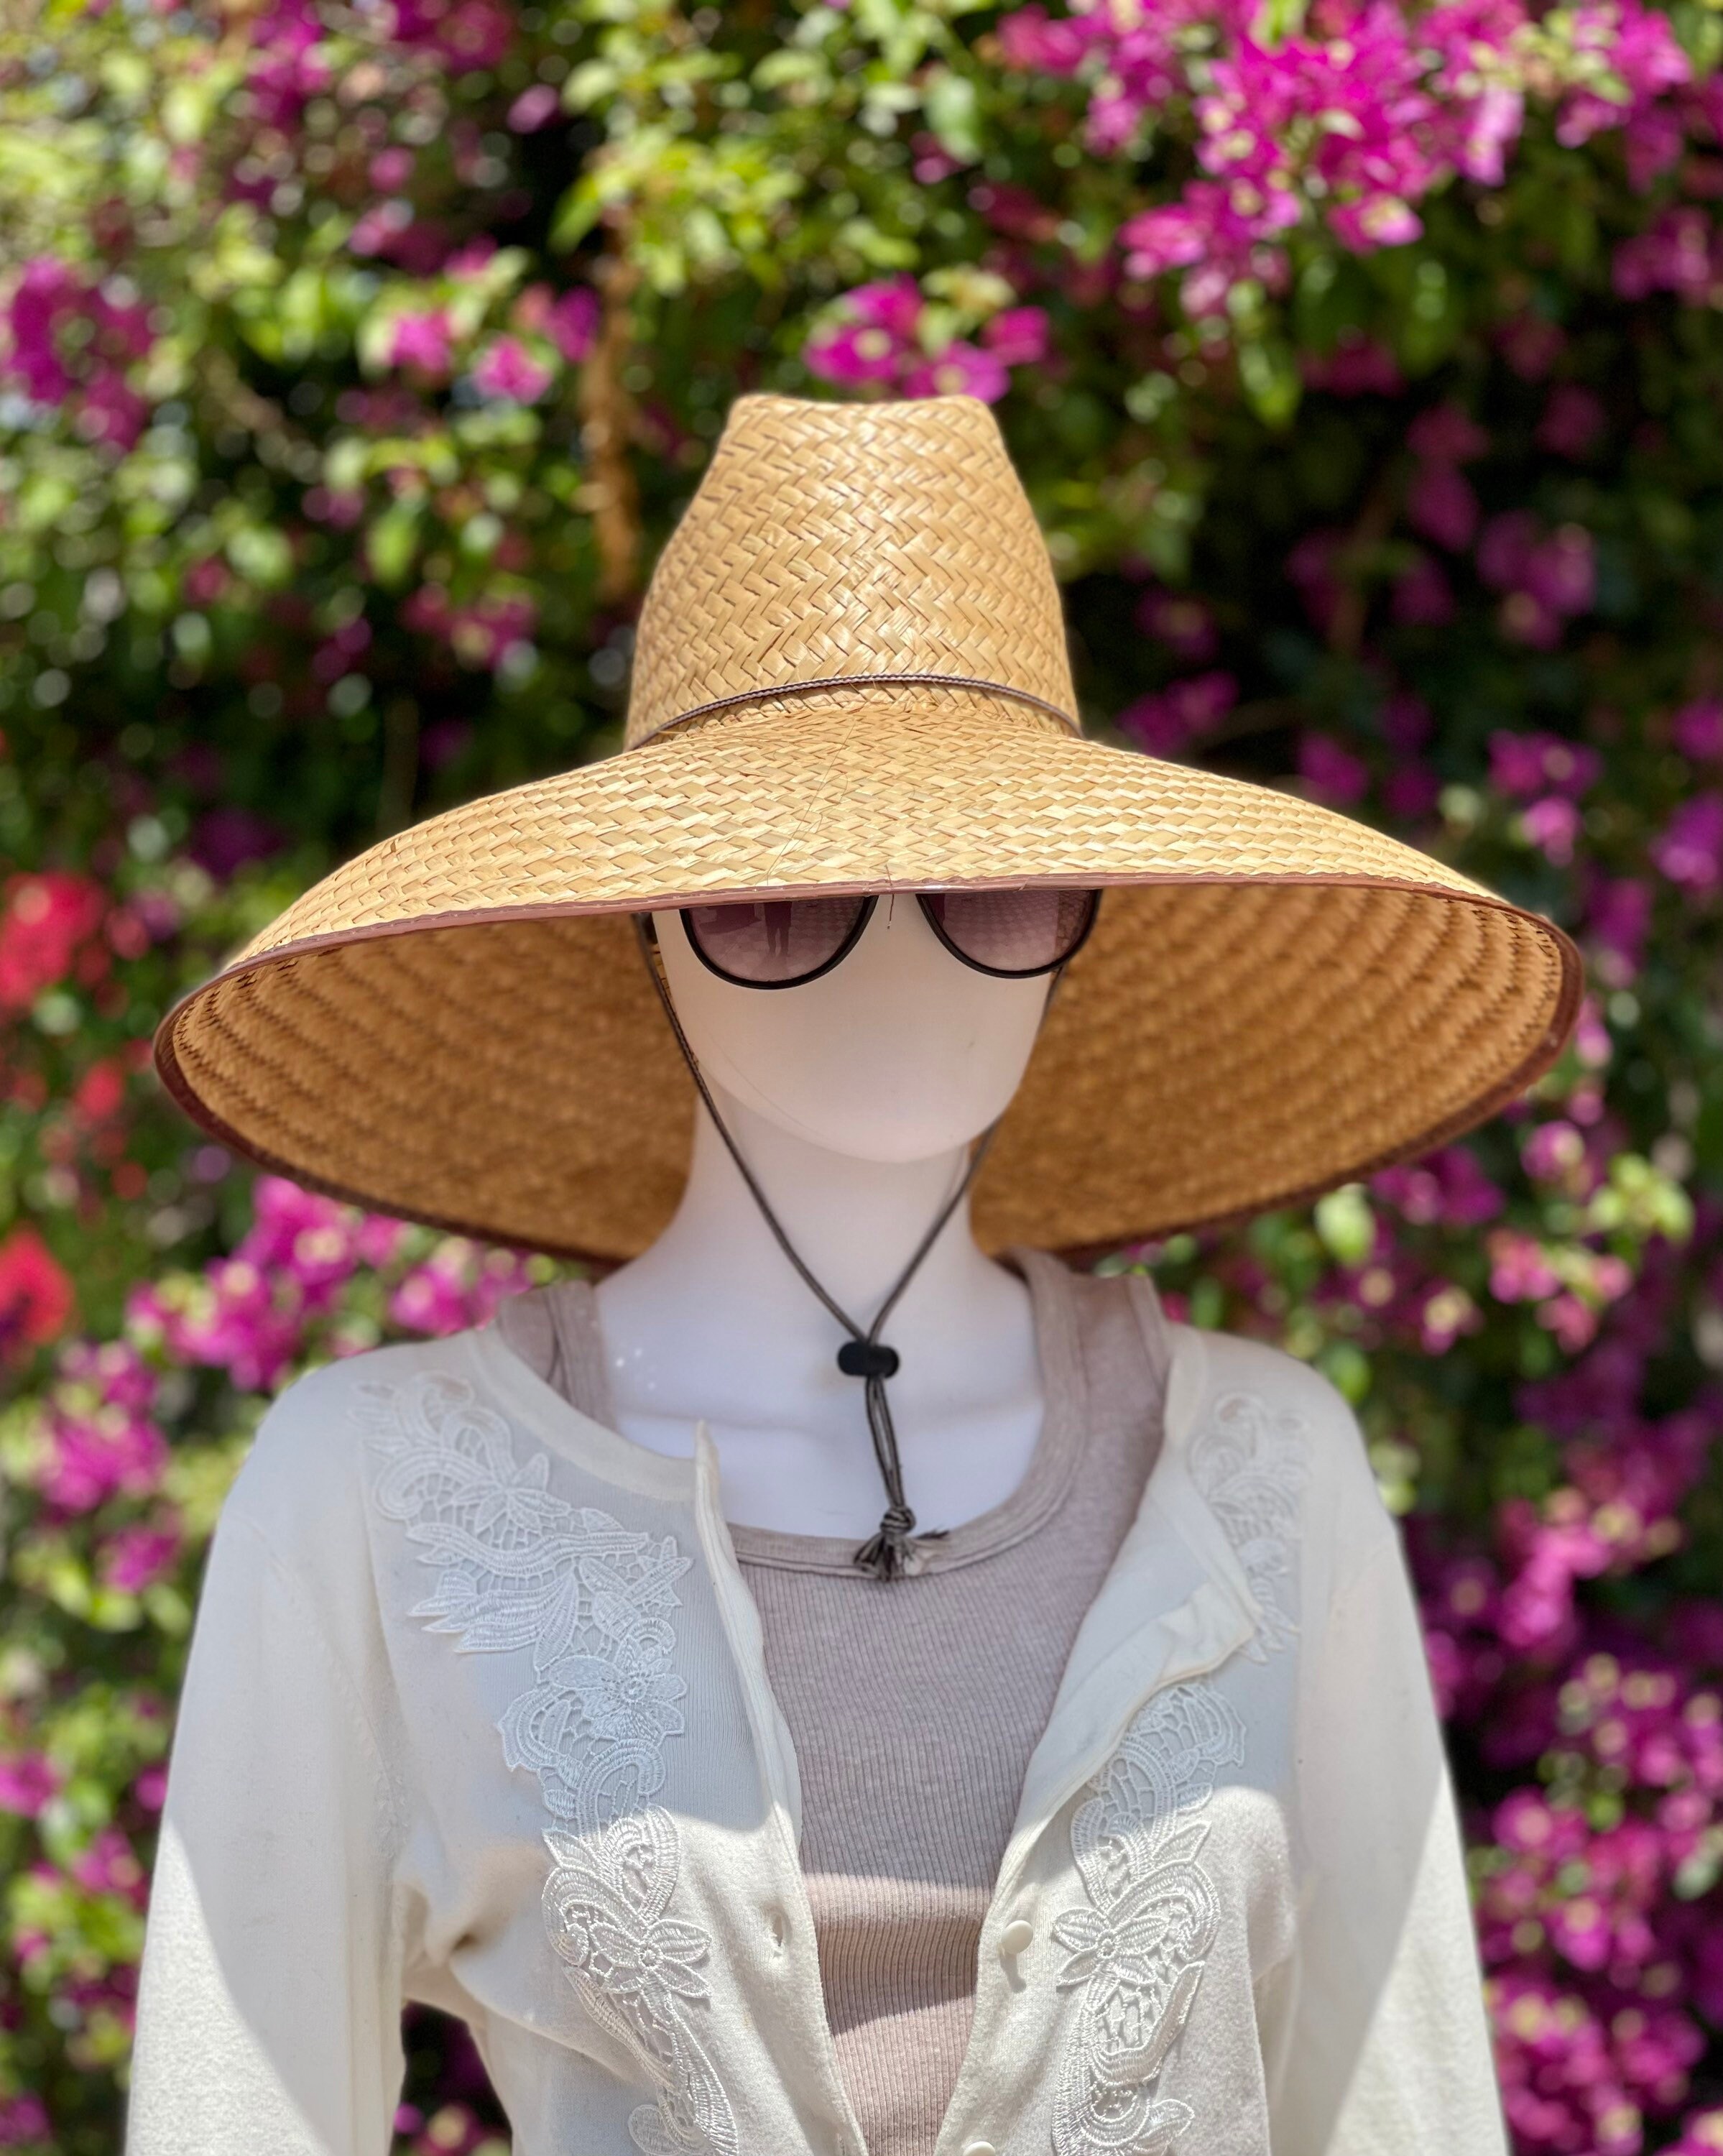 Sizzling Summer Sale! 2 Straw Hats Maximum Sun Protection! 1 Jumbo Straw Hat and 1 Ventilated Gardening Straw Hat, unisex Hats! All Natural